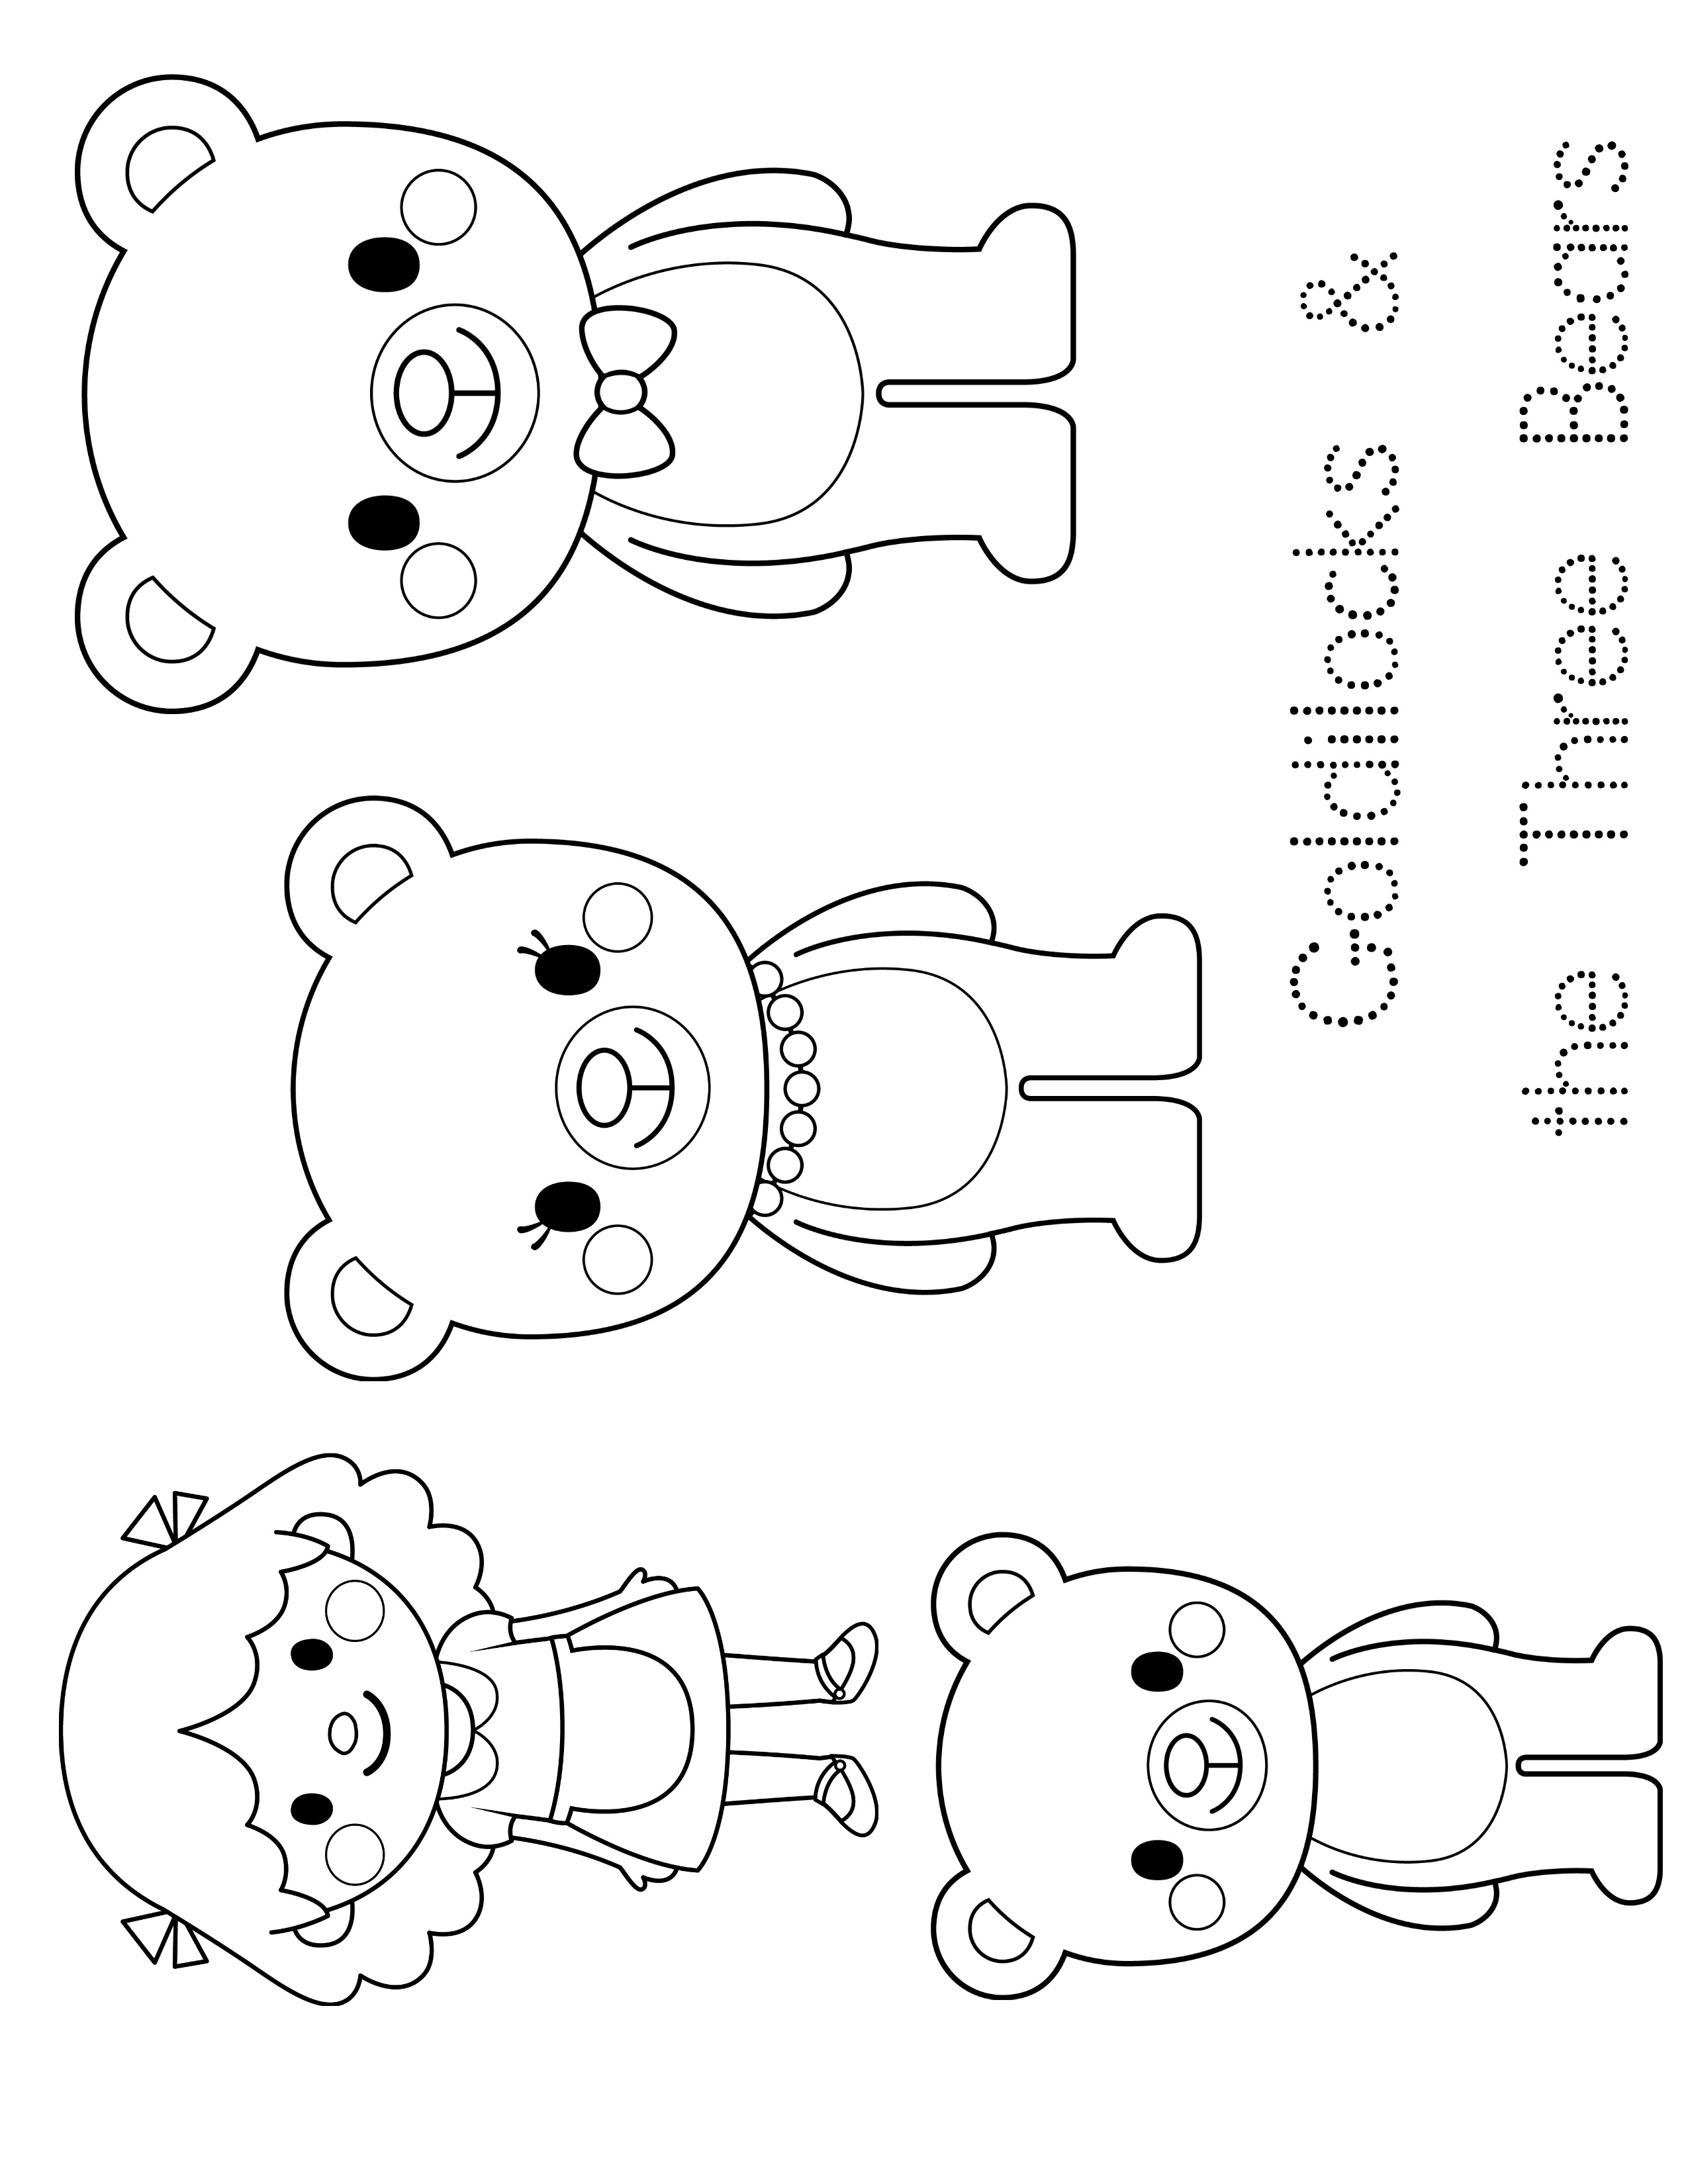 Goldilocks And The Three Bears Coloring Pages Free at GetDrawings ...